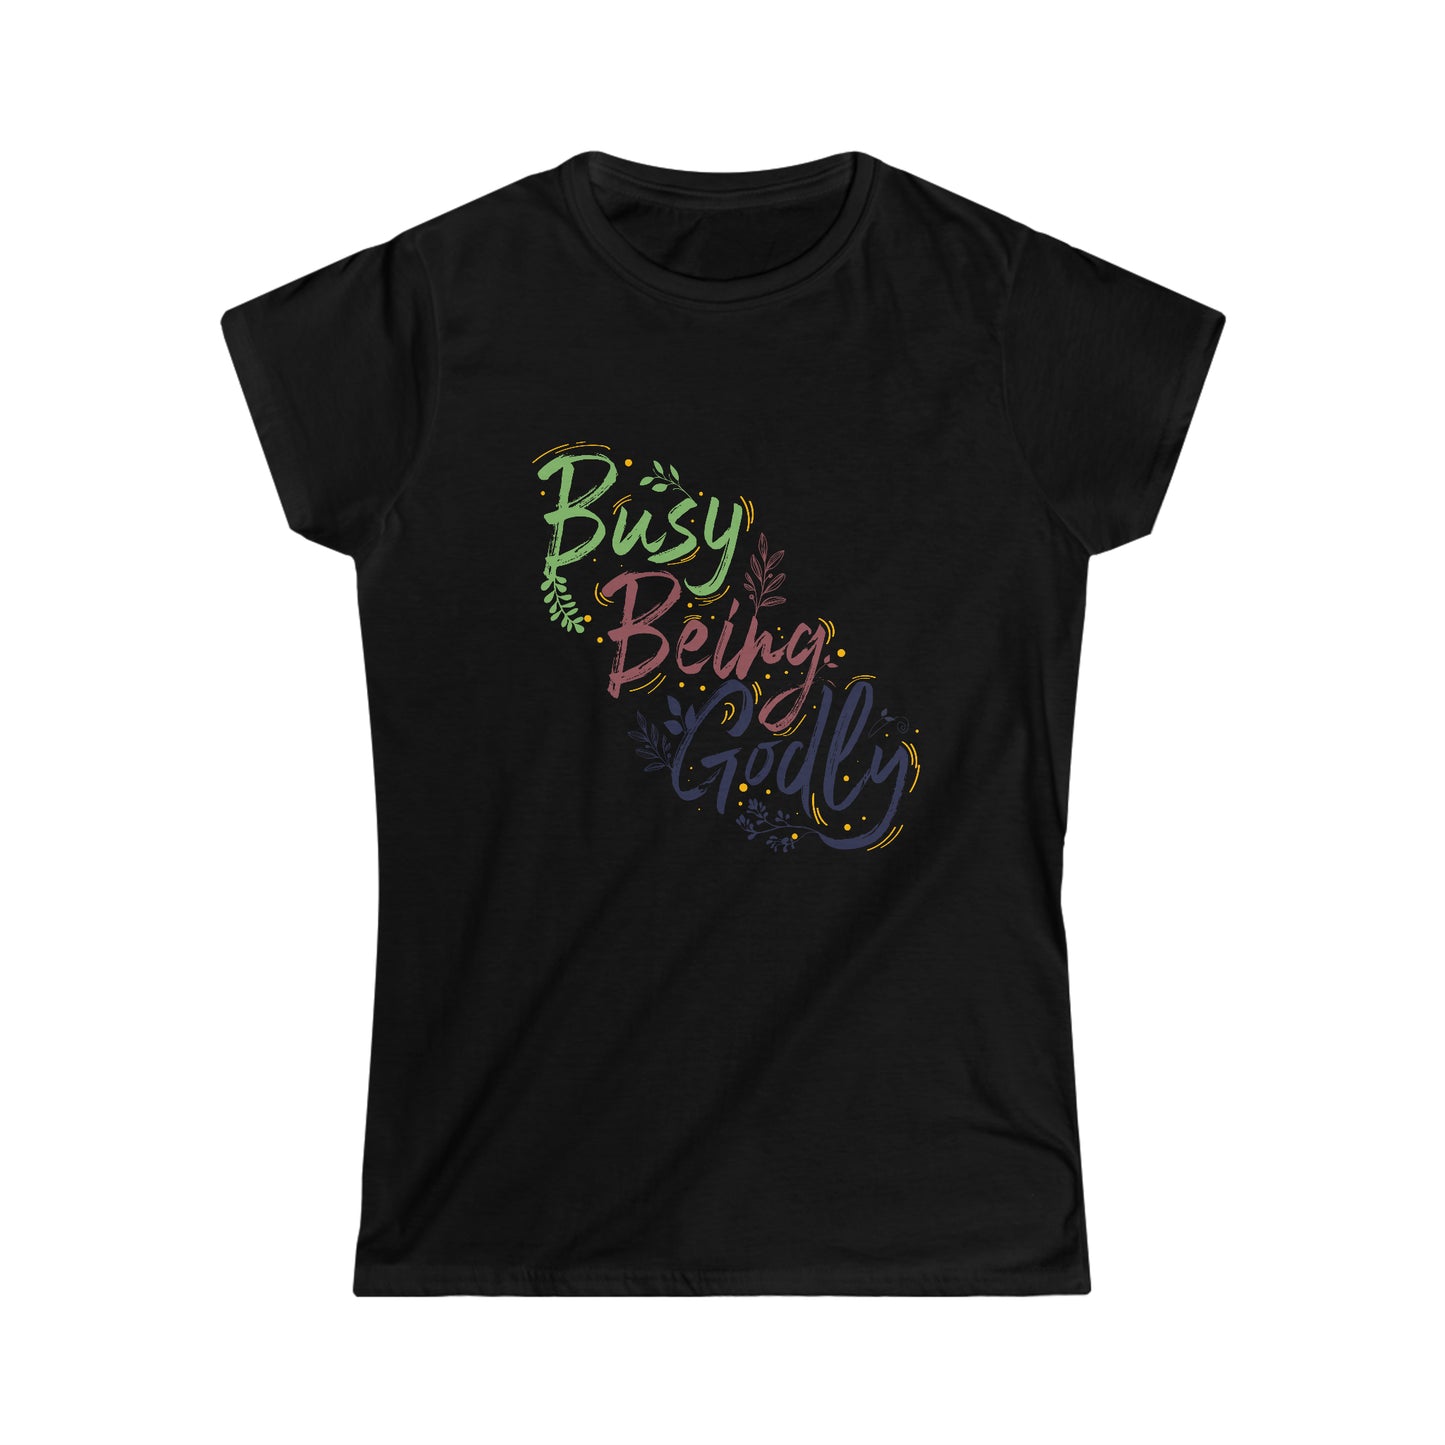 Busy Being Godly Women's T-shirt